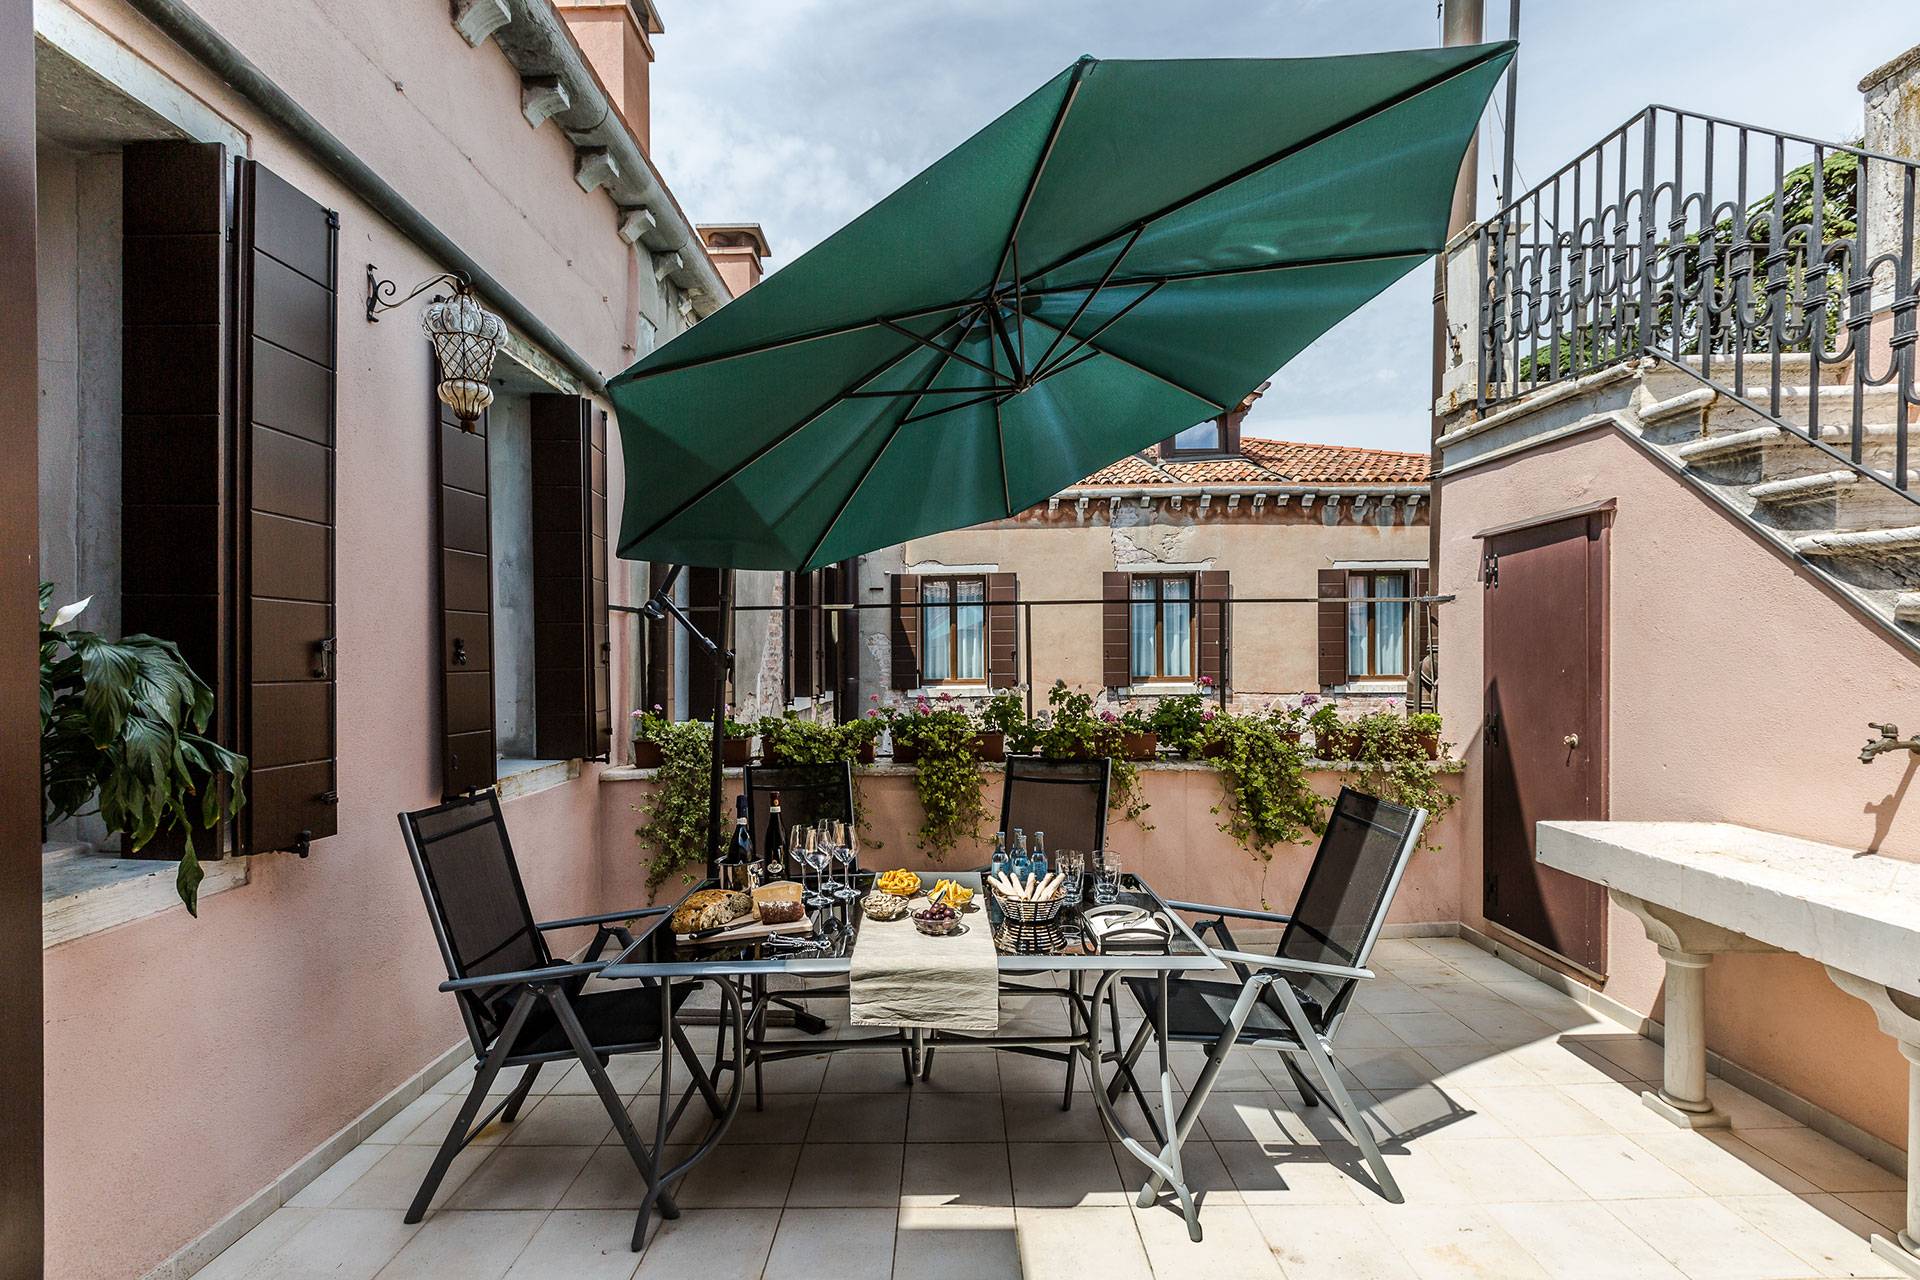 the guests of the Alighieri have access to a beautiful shared terrace